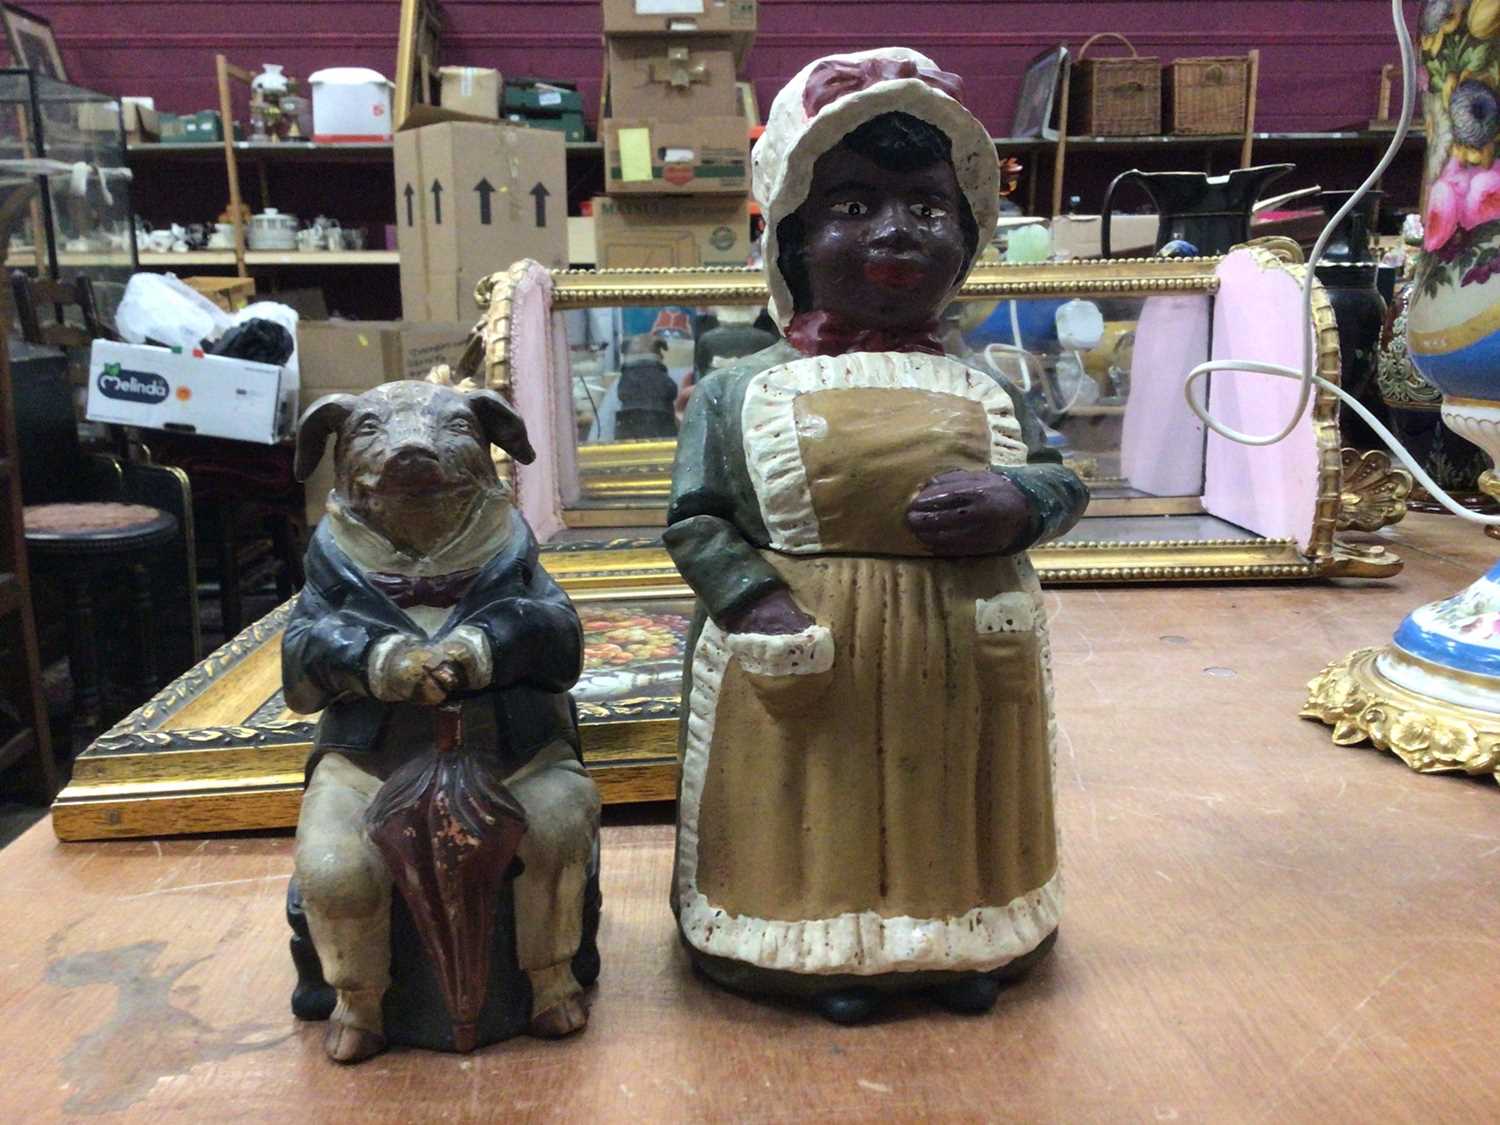 Lot 20 - Two Austrian terracotta figural boxes, one in the form of a pig seated on a chair, marked JM for Johann Maresch, the other a black woman